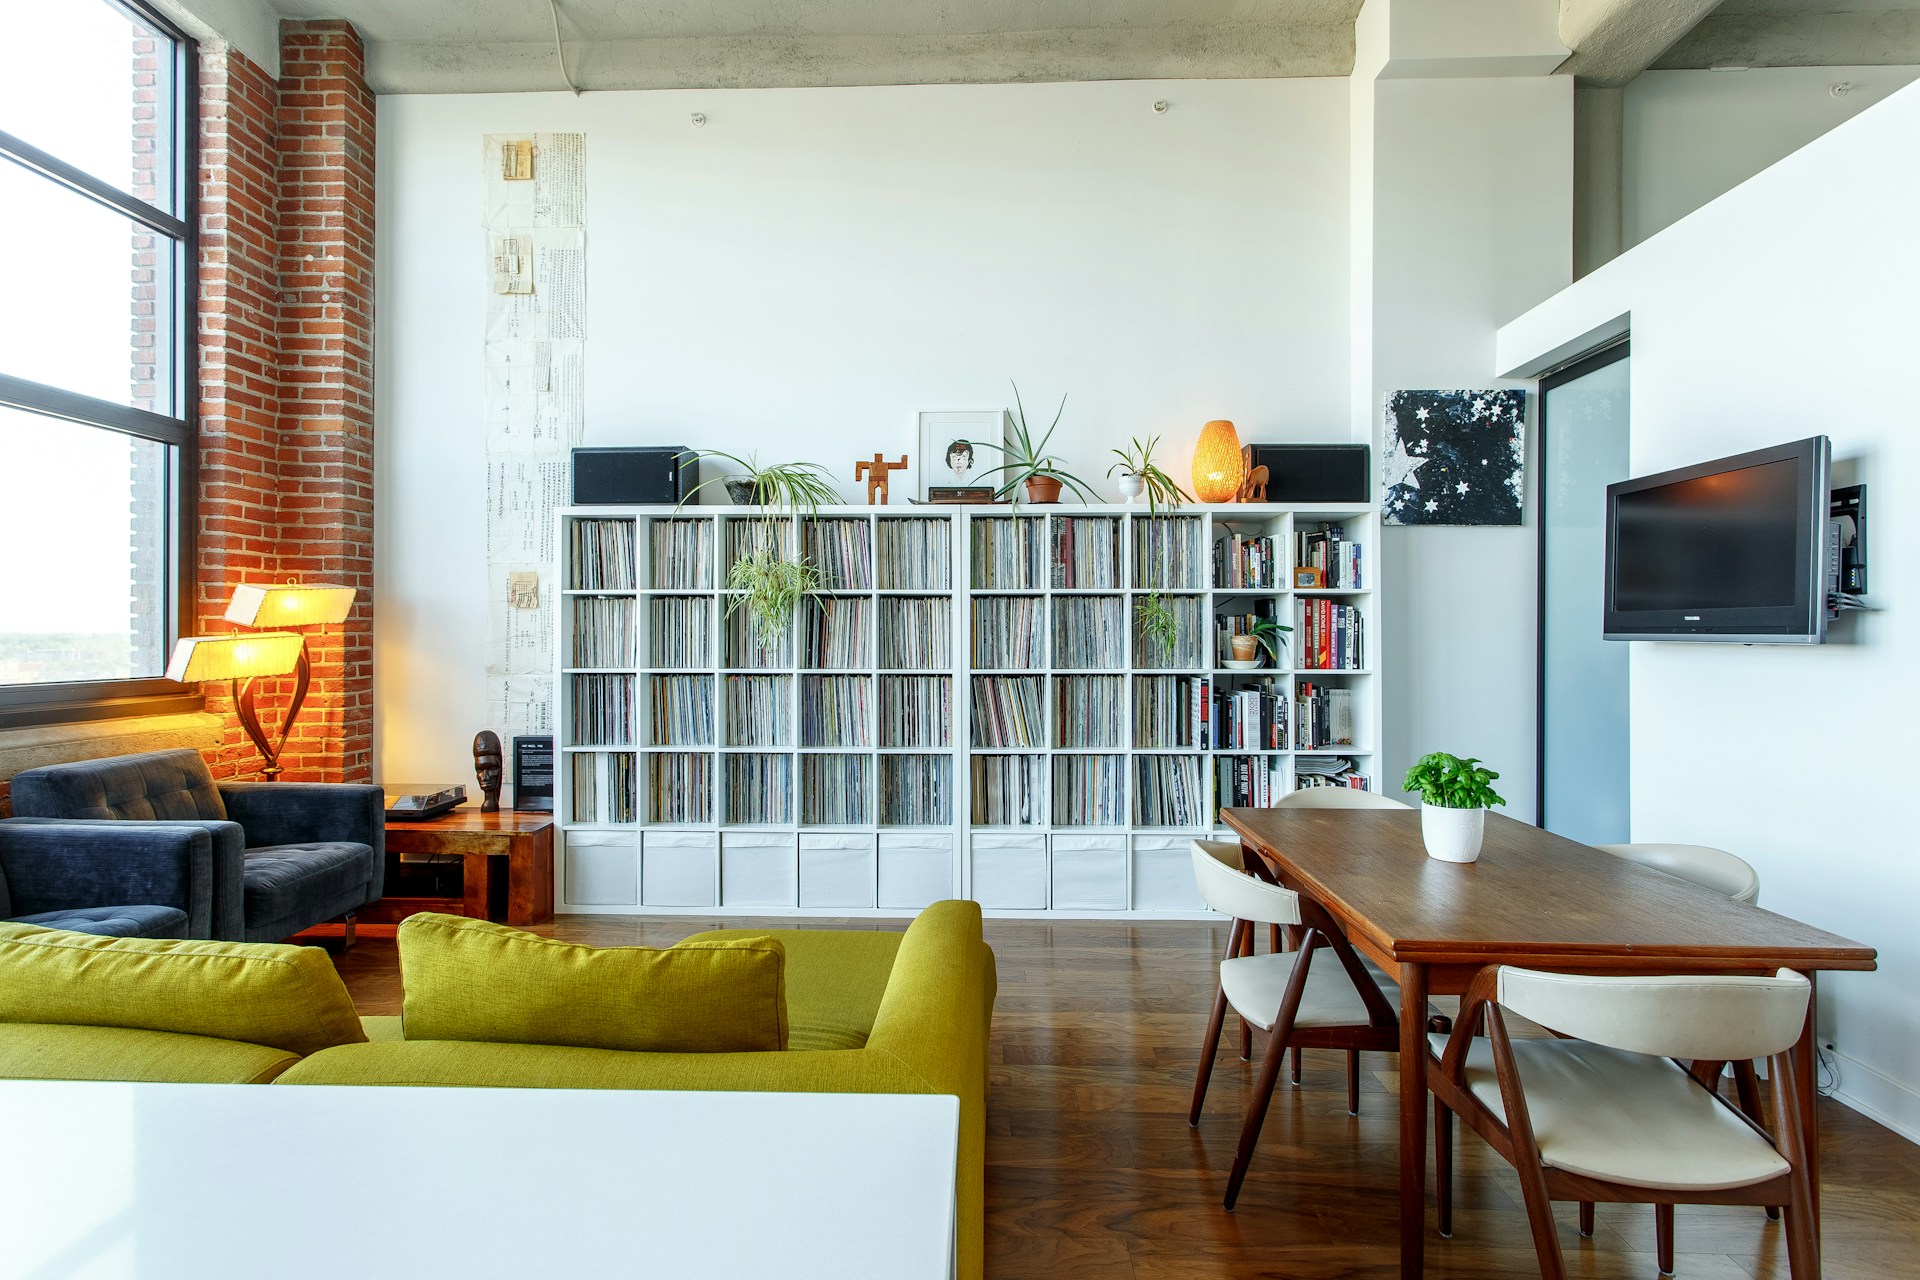 Sustainable and Stylish: A Guide to Revitalizing Your Living Space